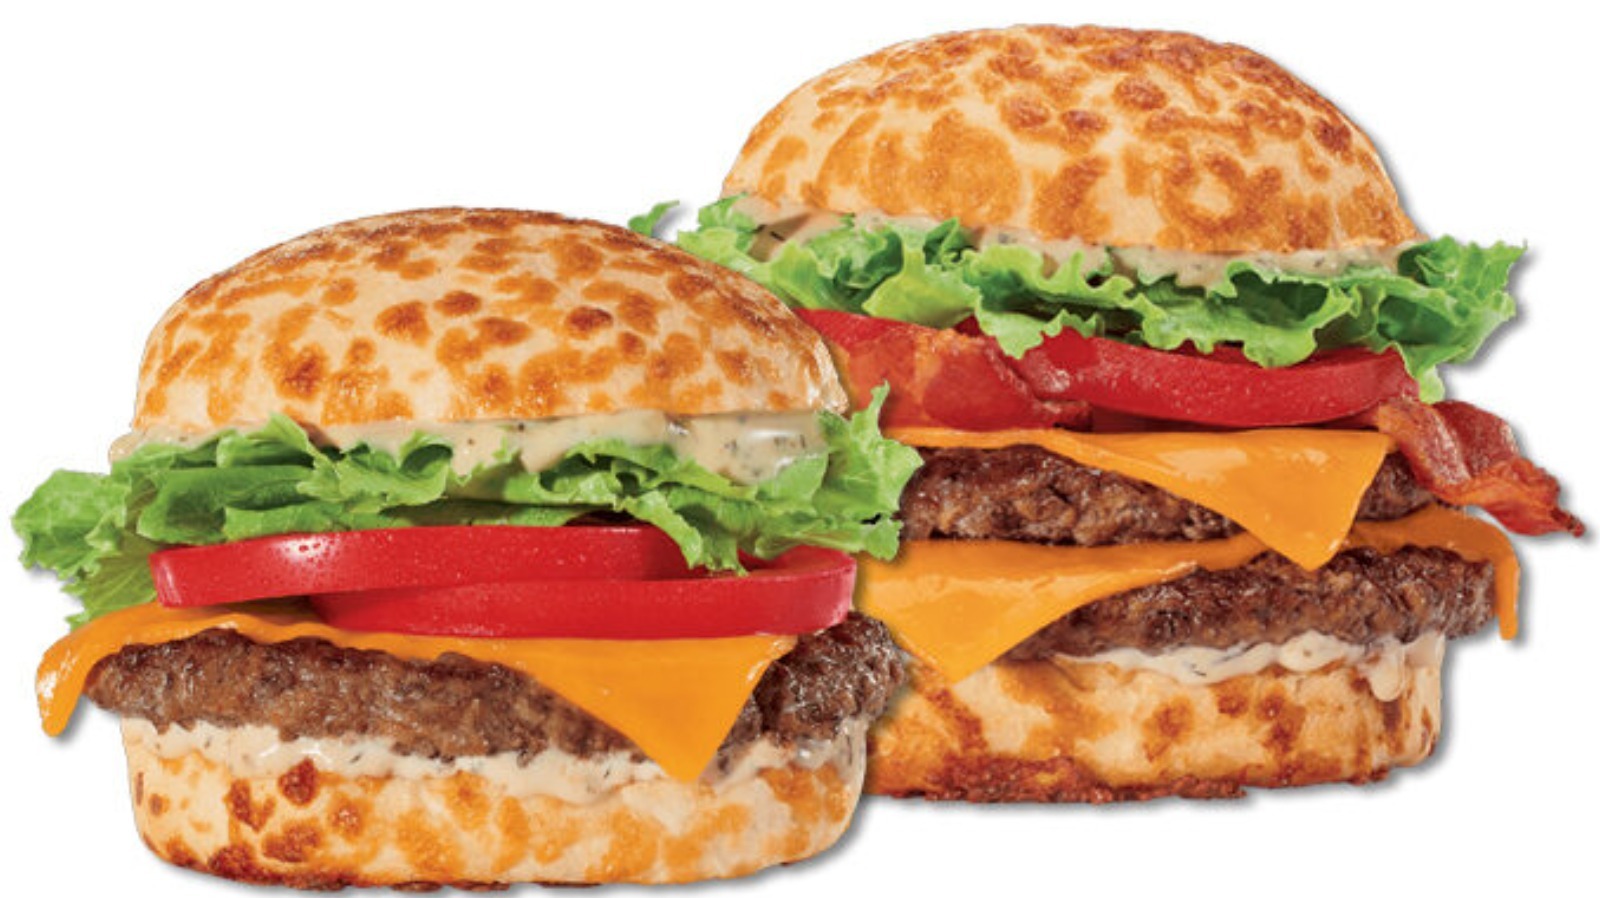 Everything You Need To Know About Jack In The Box's Loaded Burgers